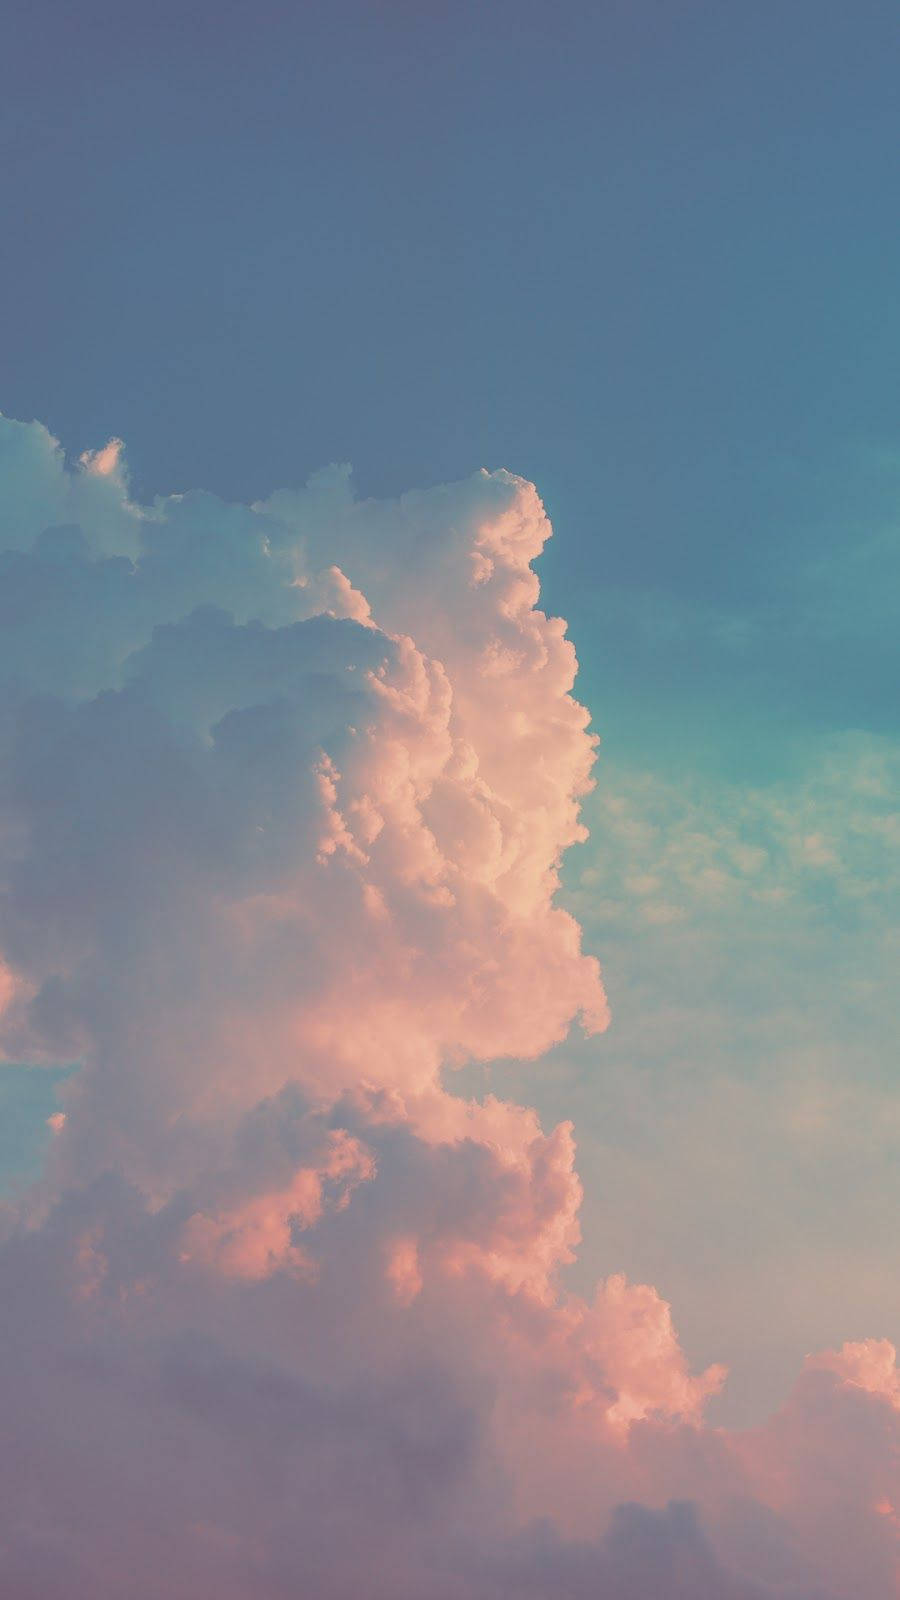 Take In The Calming Sight Of The Aesthetic Cloud Wallpaper